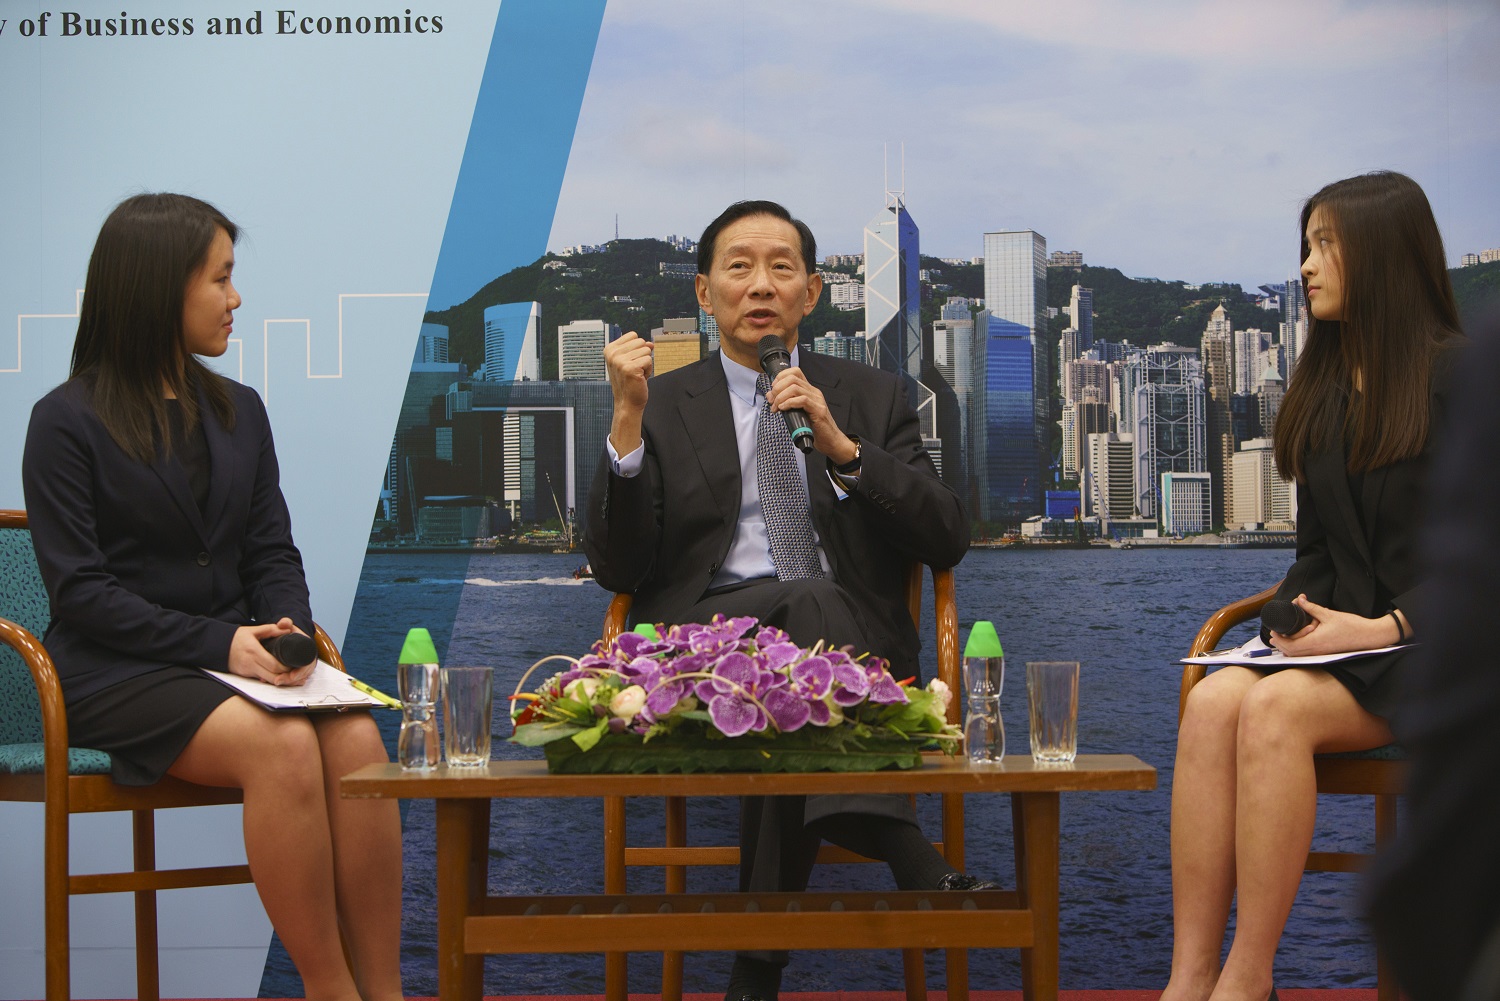 Mr. Peter Wong Tung Shun answers audience’s questions in a Q&A session moderated by two Student Ambassadors.